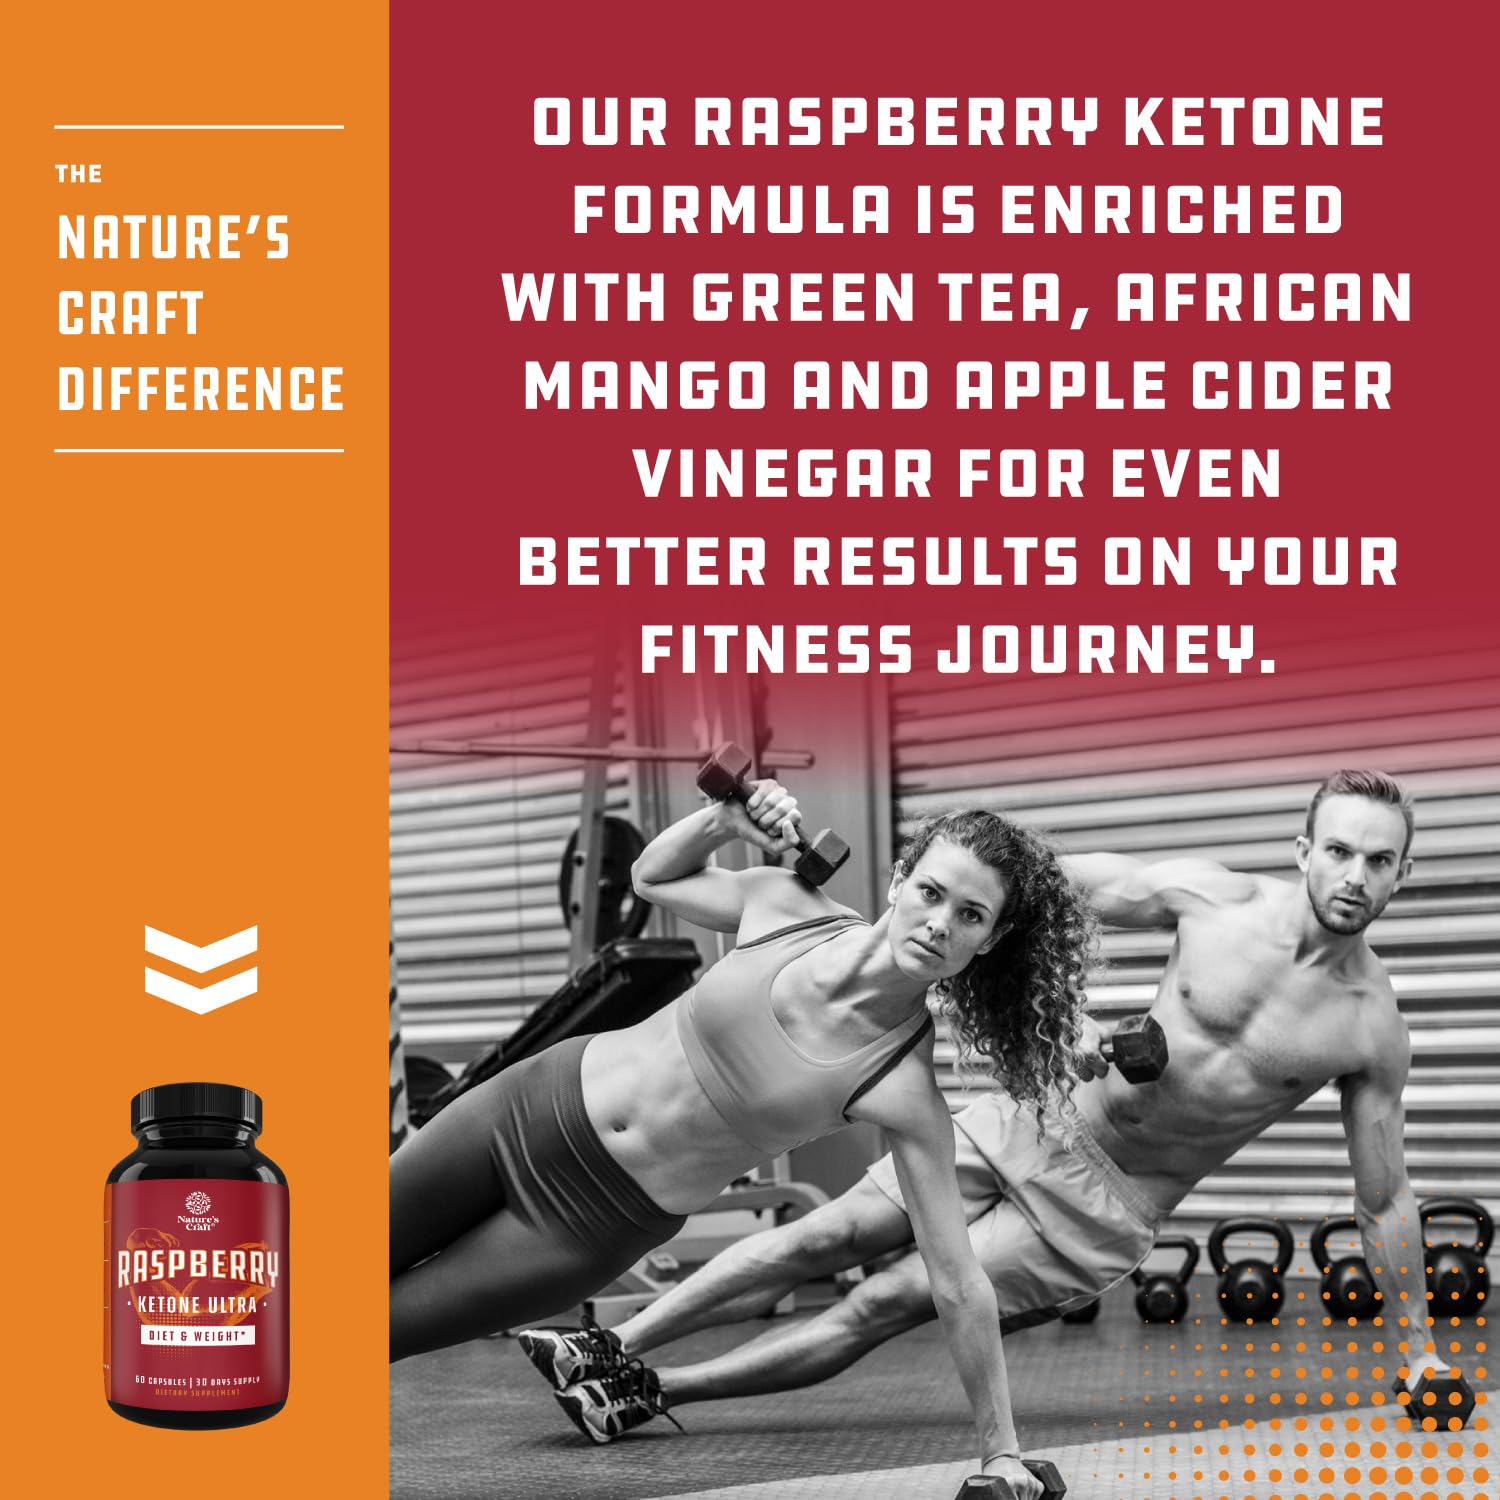 Bundle of Raspberry Ketones, Green Tea Extract & African Mango Blend and Extra Strength Zinc Gummies for Adults - Potent Ingredients to Speed Up Weight Loss, Gluten and Gelatin Free